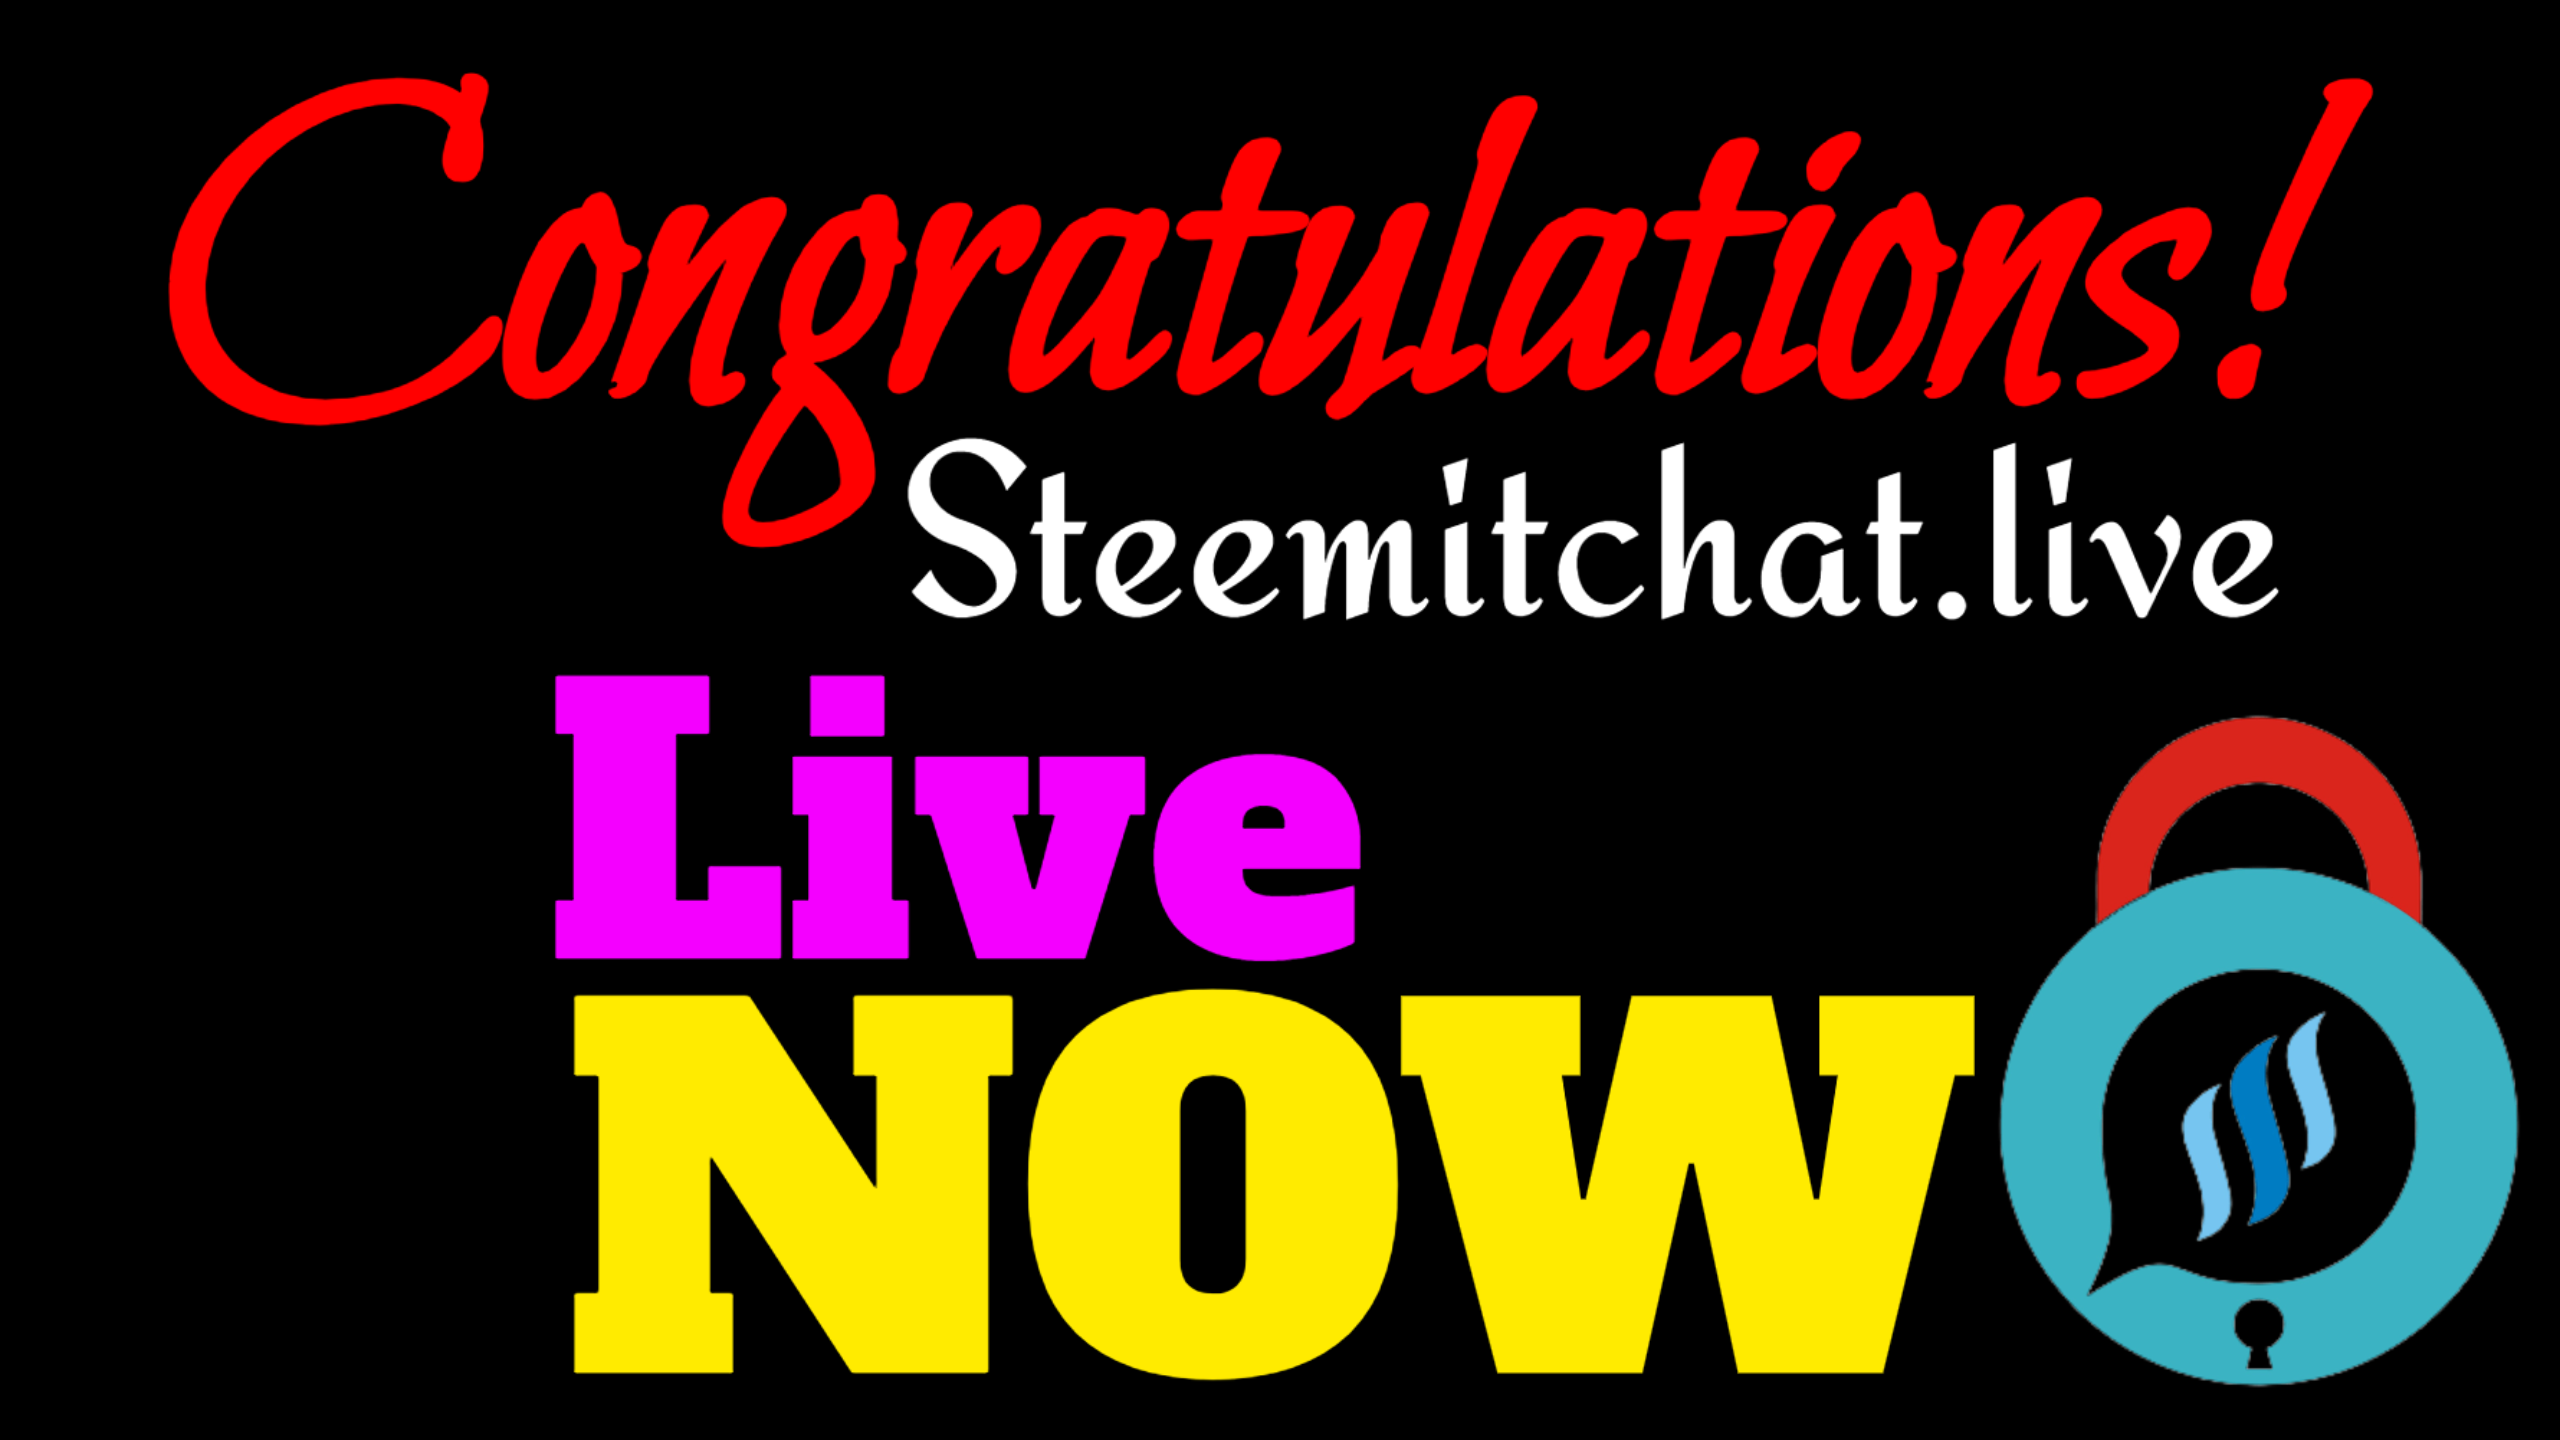 steemitchat-live-chat-portal-is-live-for-steemit-users-steemit